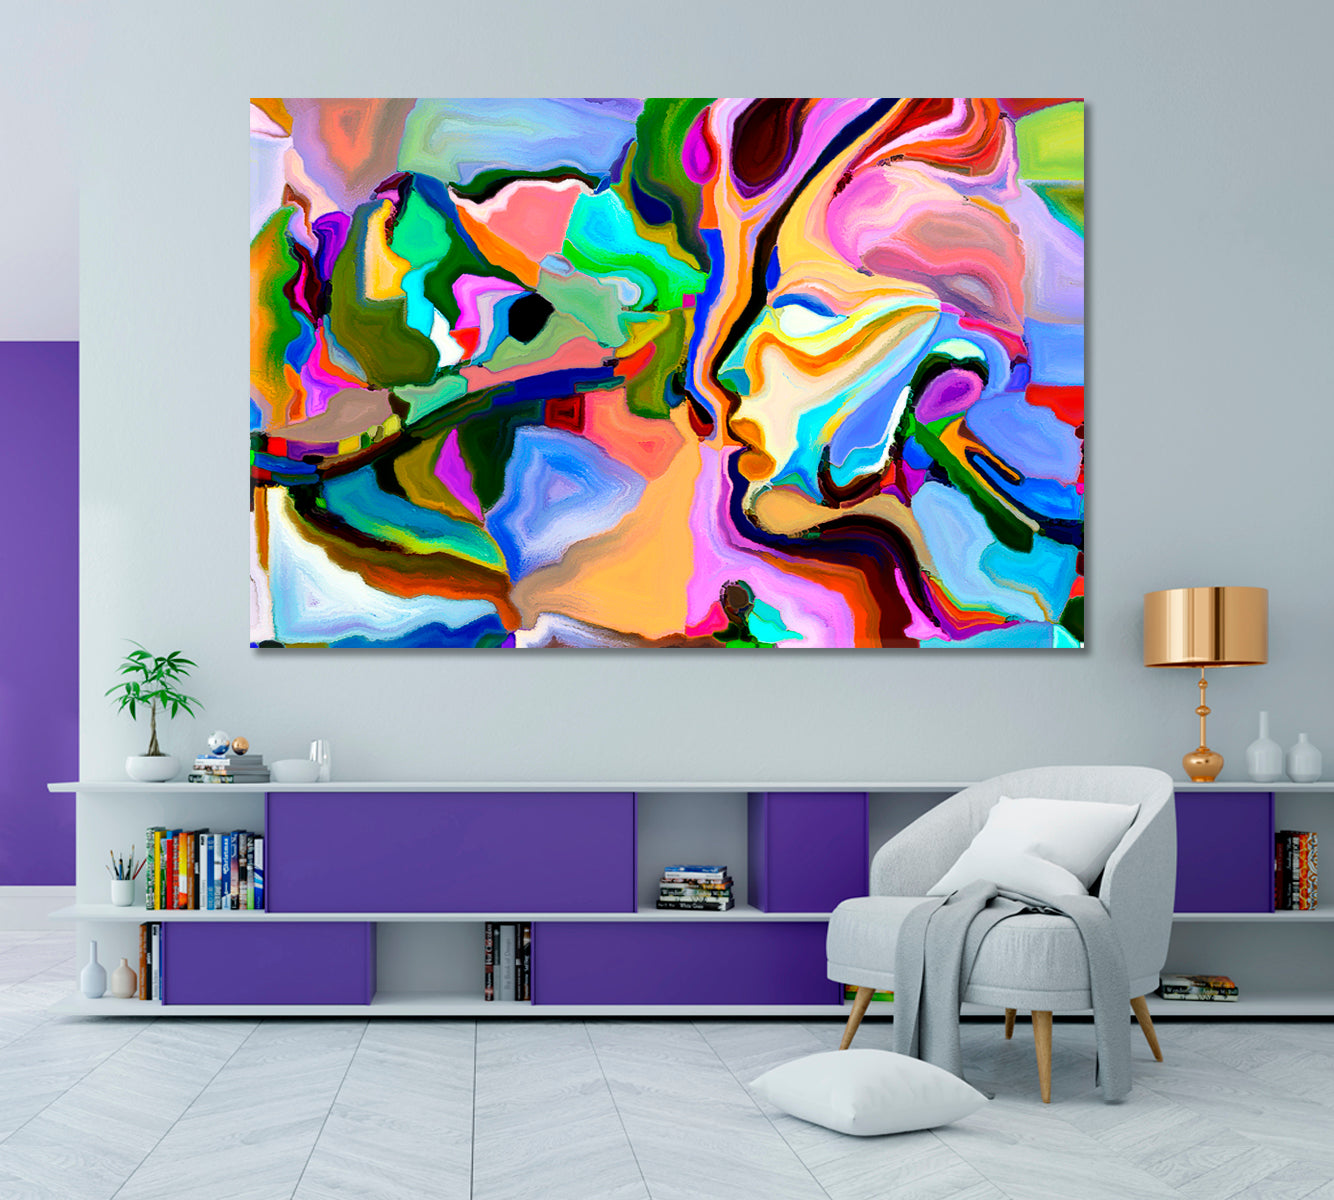 Magical Vivid Colors Game Abstract Design Abstract Art Print Artesty 1 panel 24" x 16" 